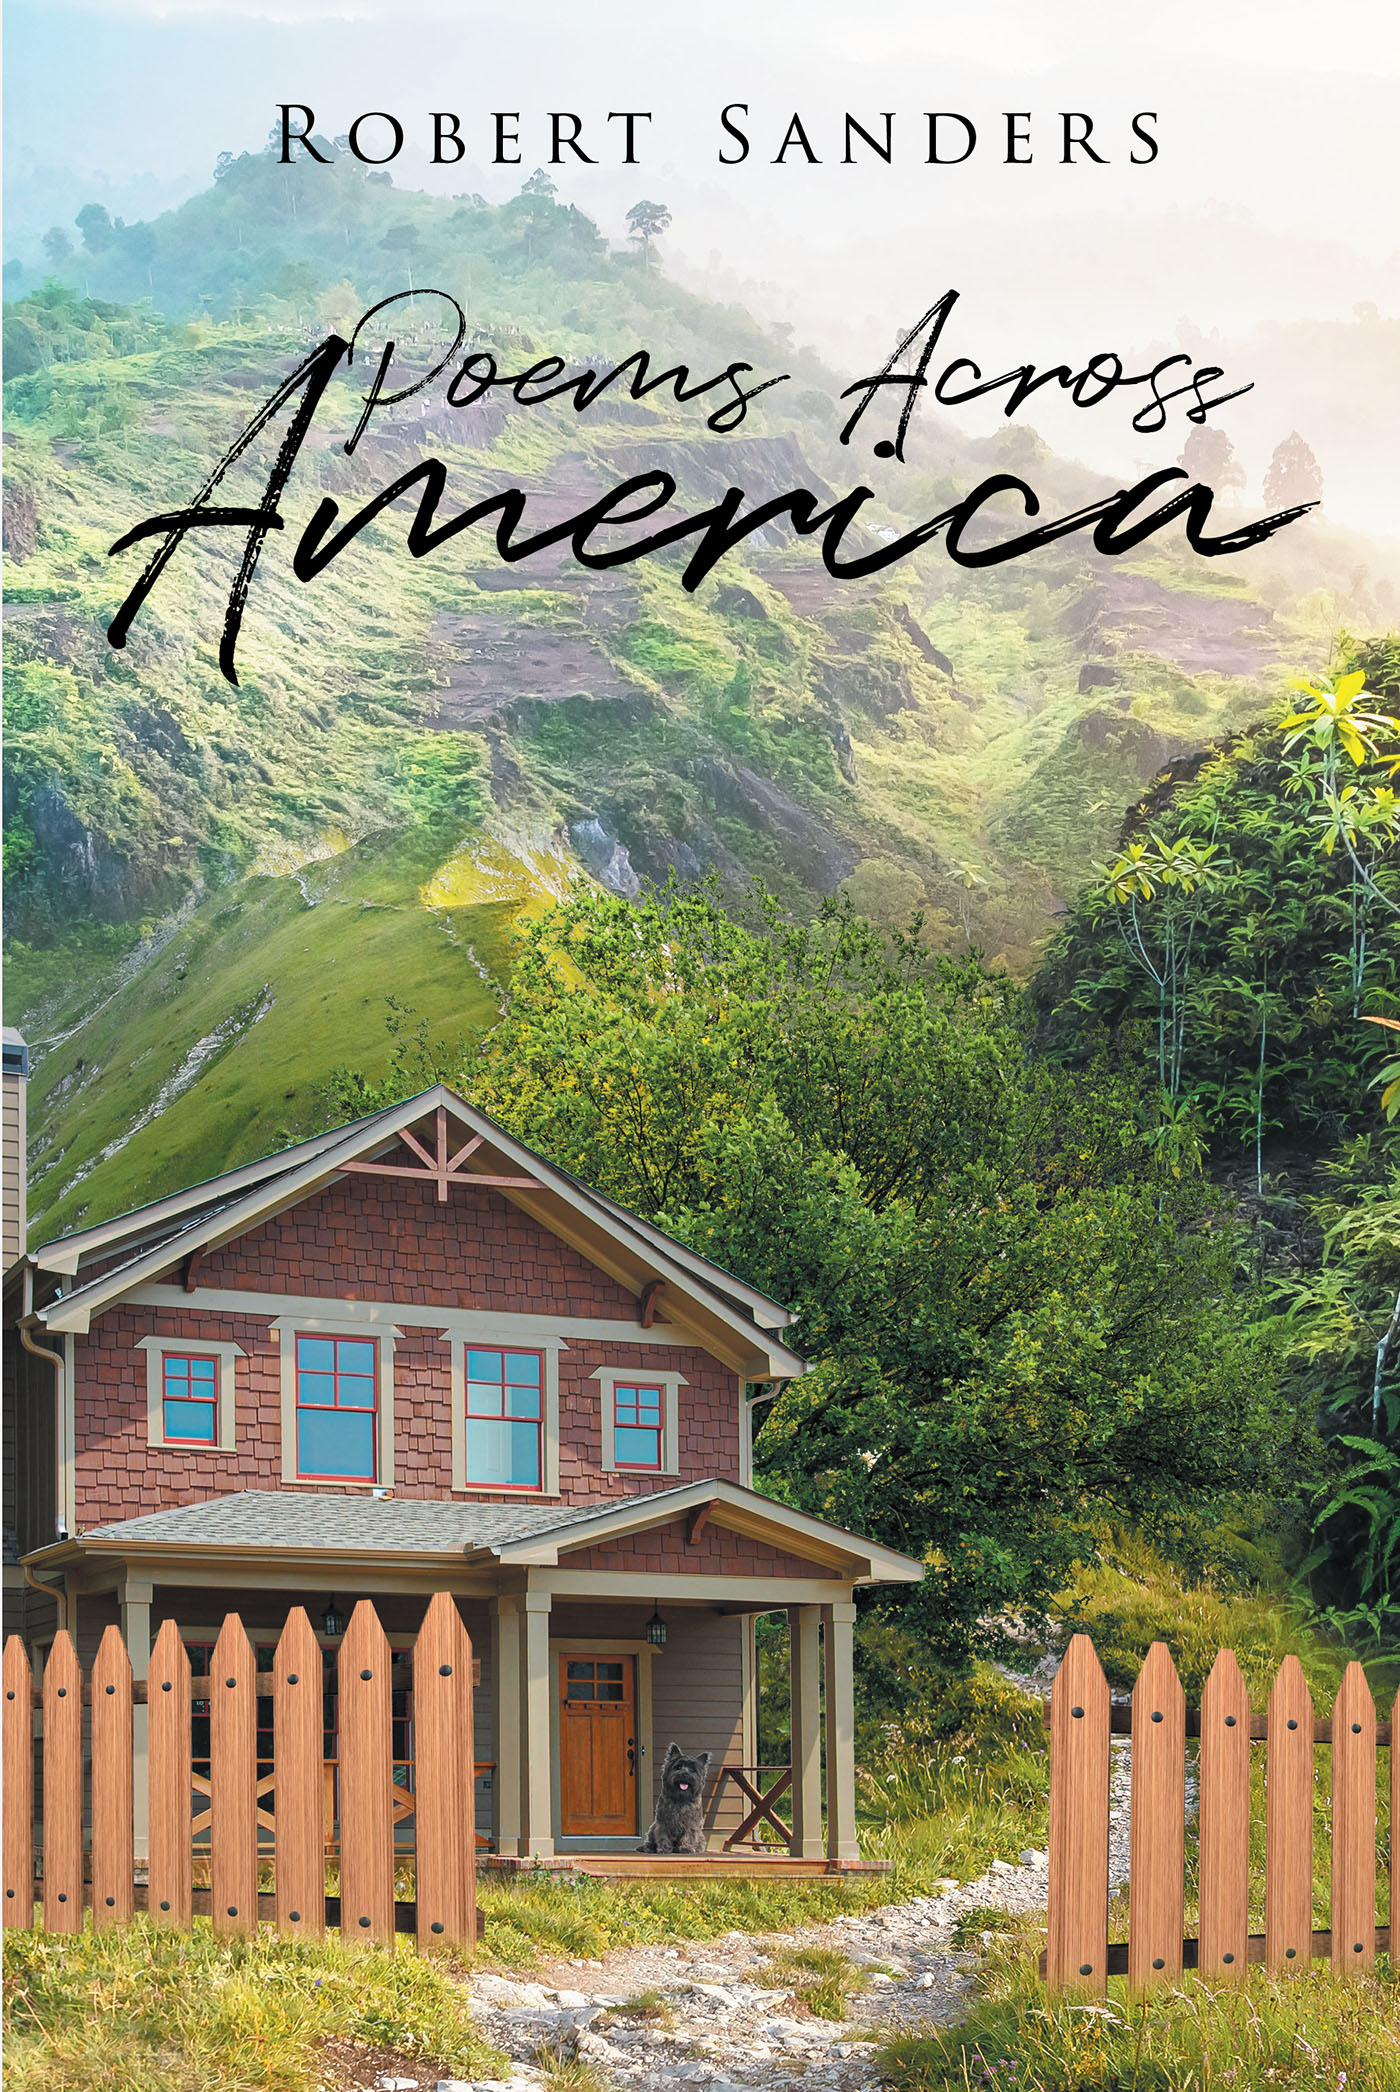 Author Robert Sanders’s New Book, "Poems Across America," is a Series of Heartfelt Poems Designed to Bring Comfort and Help Readers See the World from a New Point of View